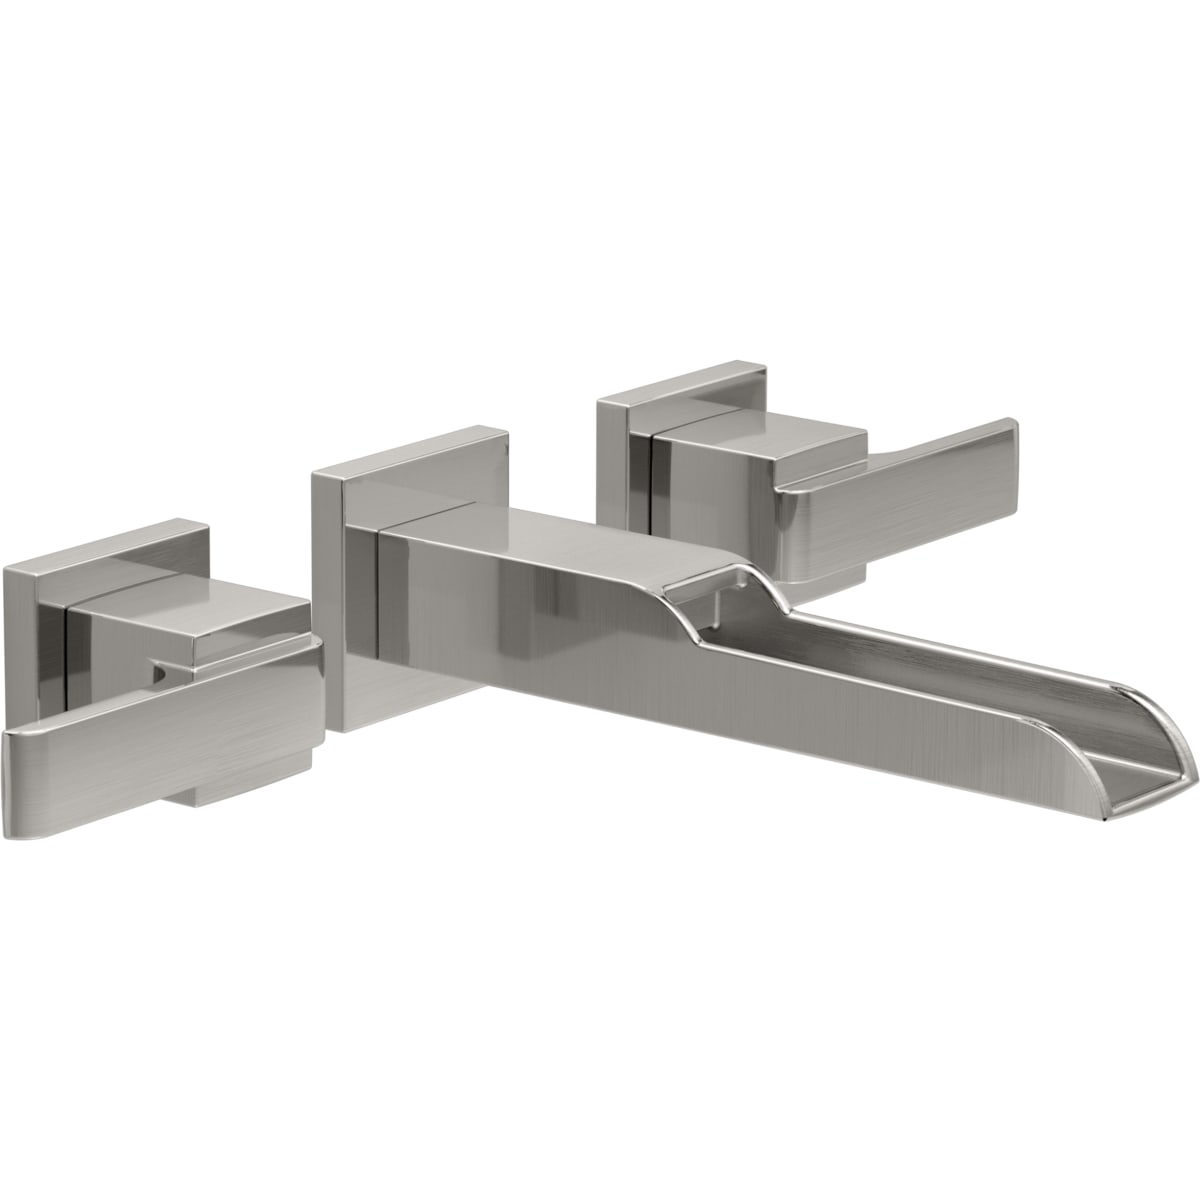 Delta T3568lf Sswl Brilliance Stainless Ara 1 2 Gpm Wall Mounted